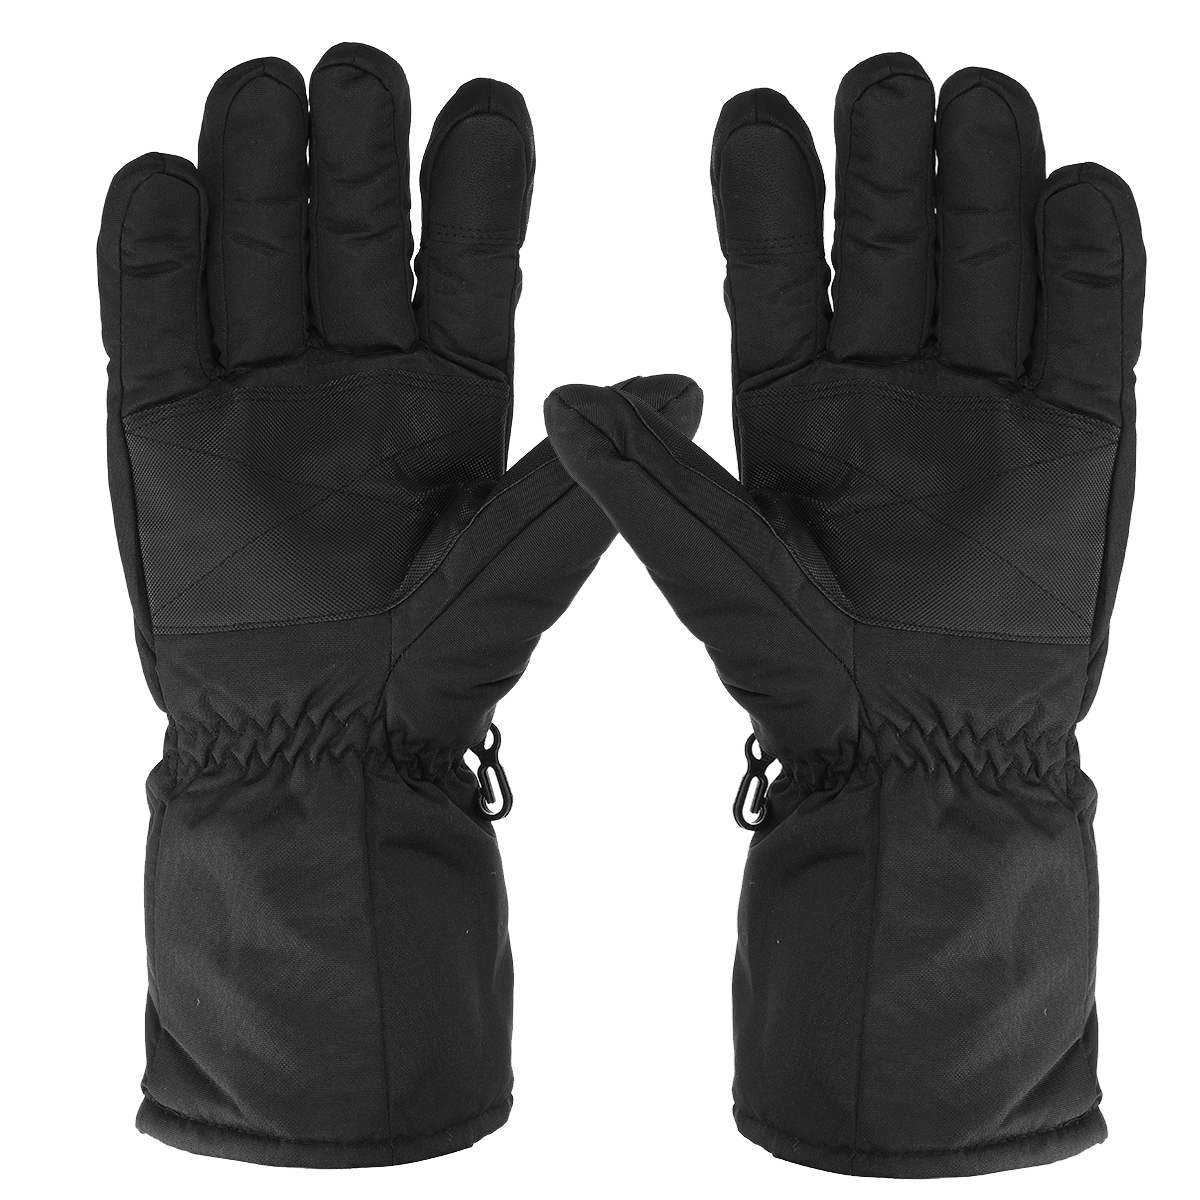 1-Pair-Electric-Heated-Gloves-Touchscreen-Warm-Battery-Gloves-Full-Finger-Waterproof-Heating-Thermal-1748583-12